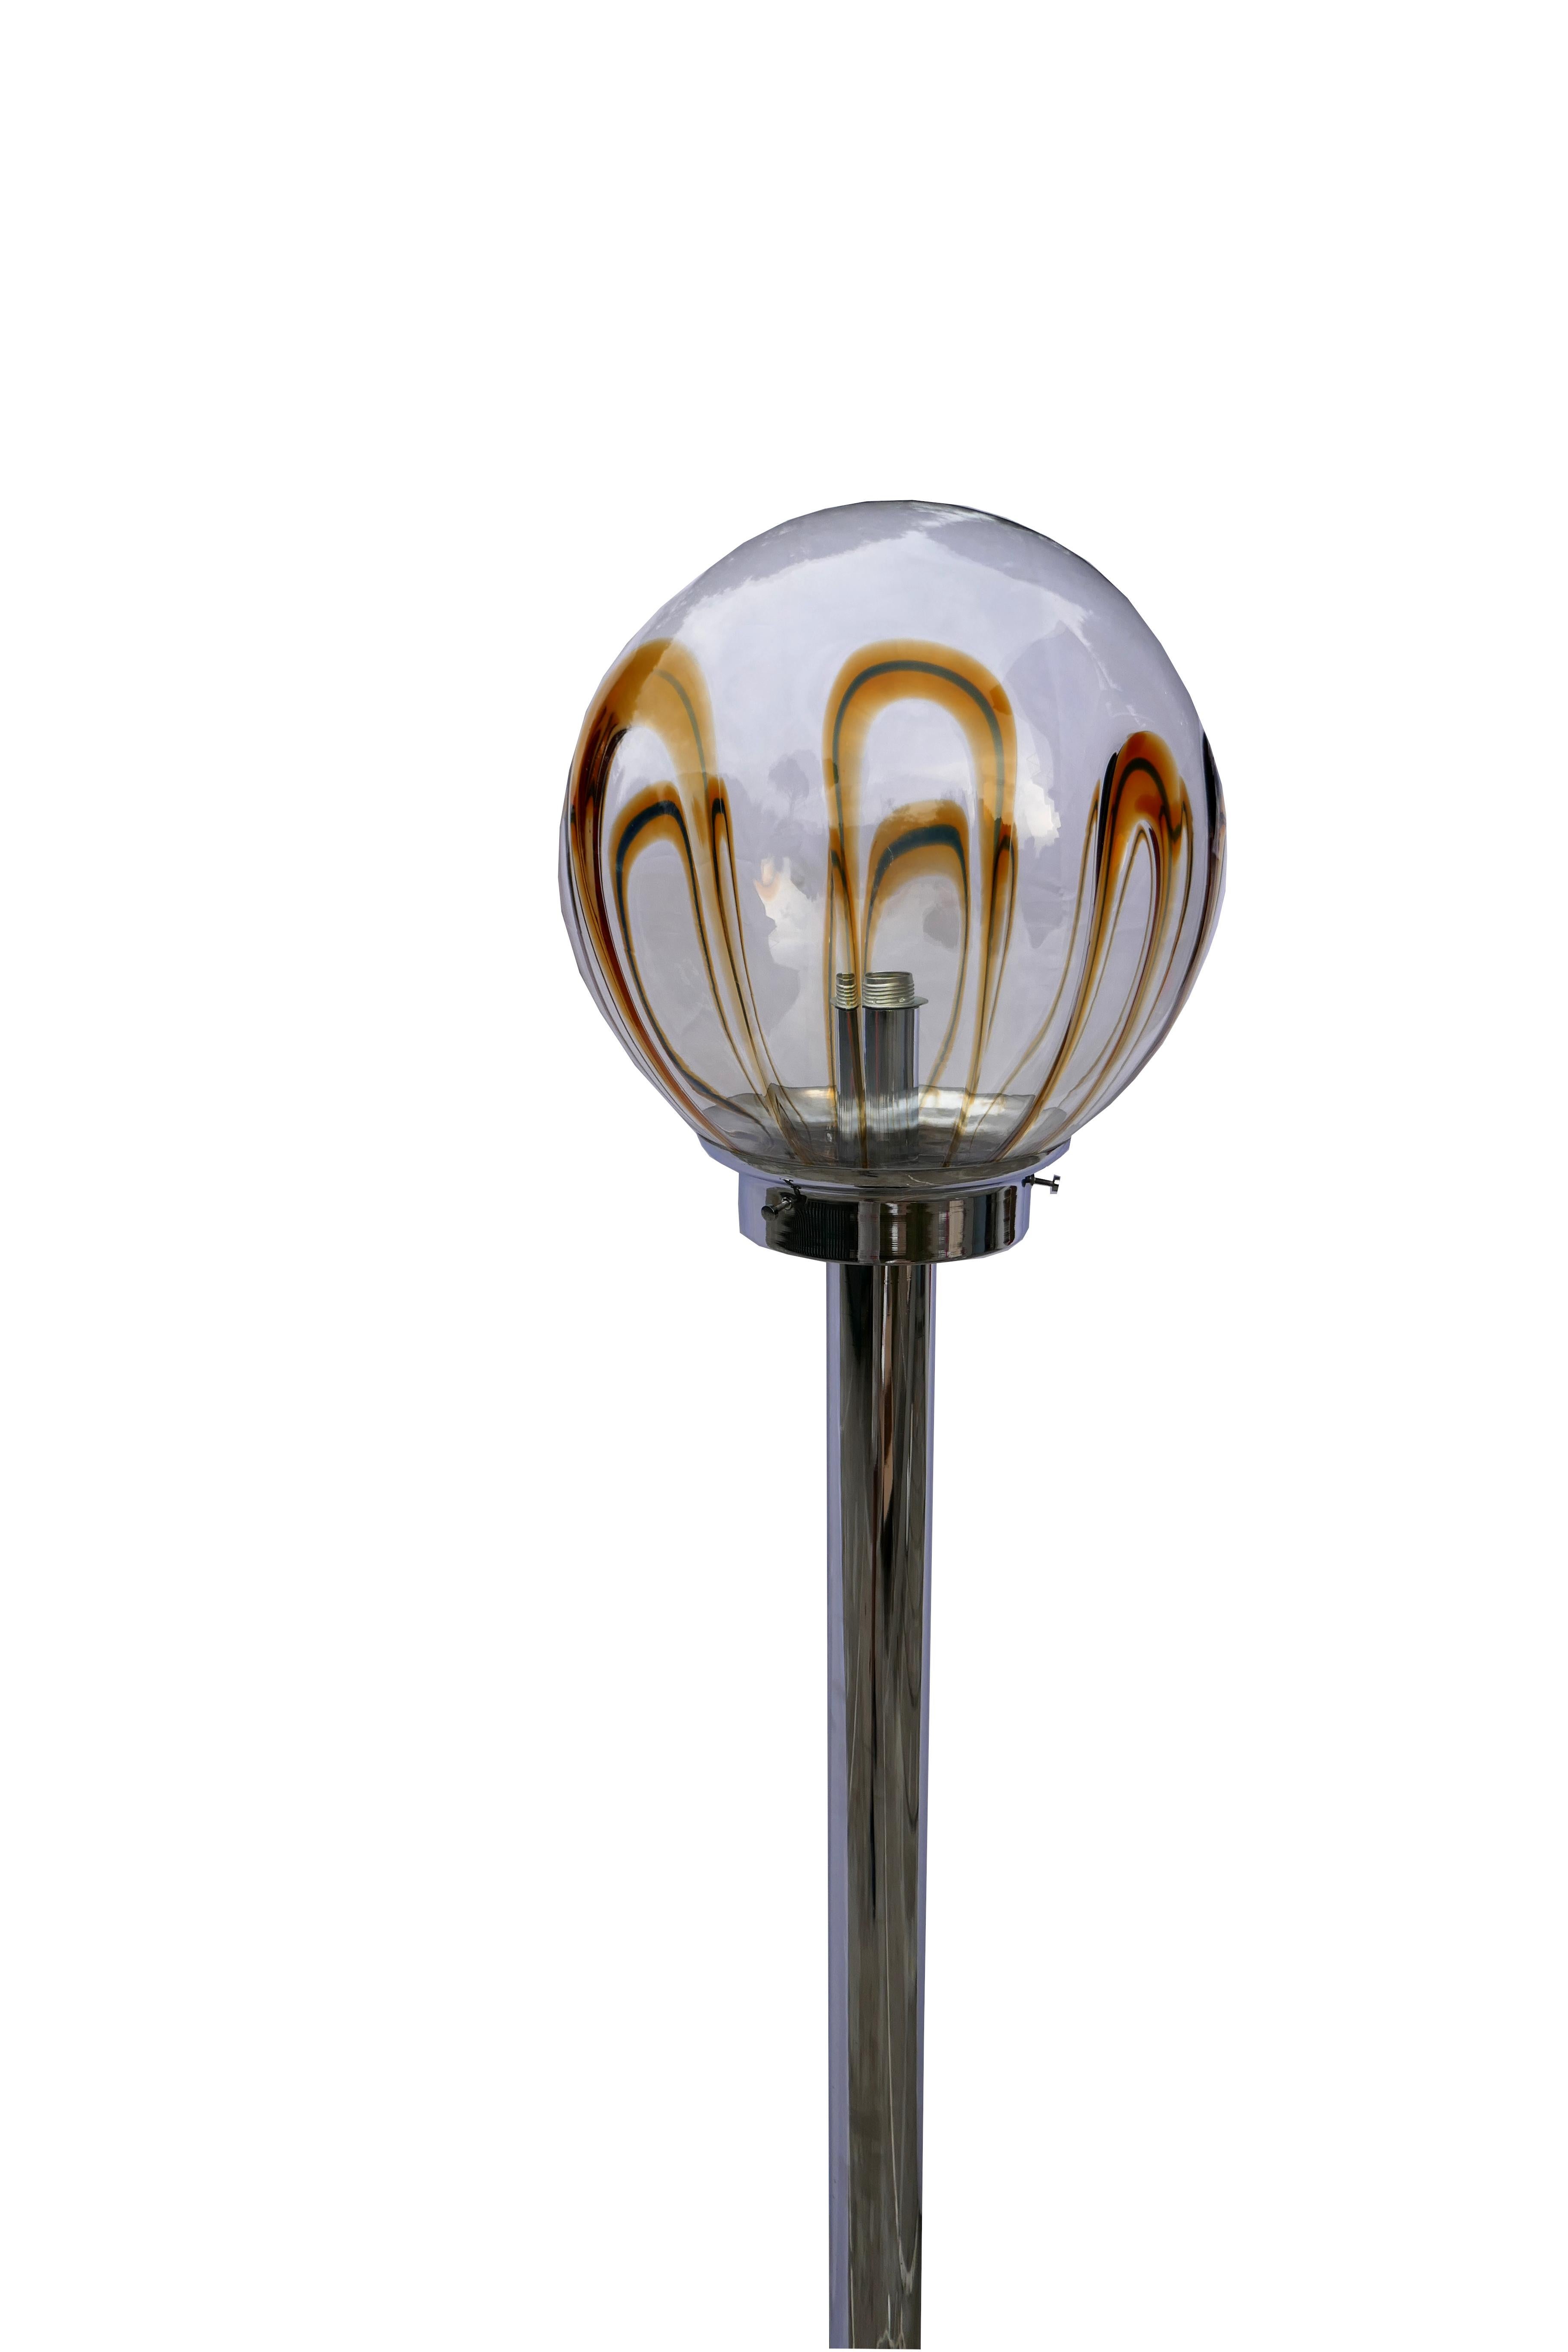 Floor lamp
Attributed to Toni Zuccheri for VeArt or Venini.
Glass perfect.
The base has been repainted
Thank you